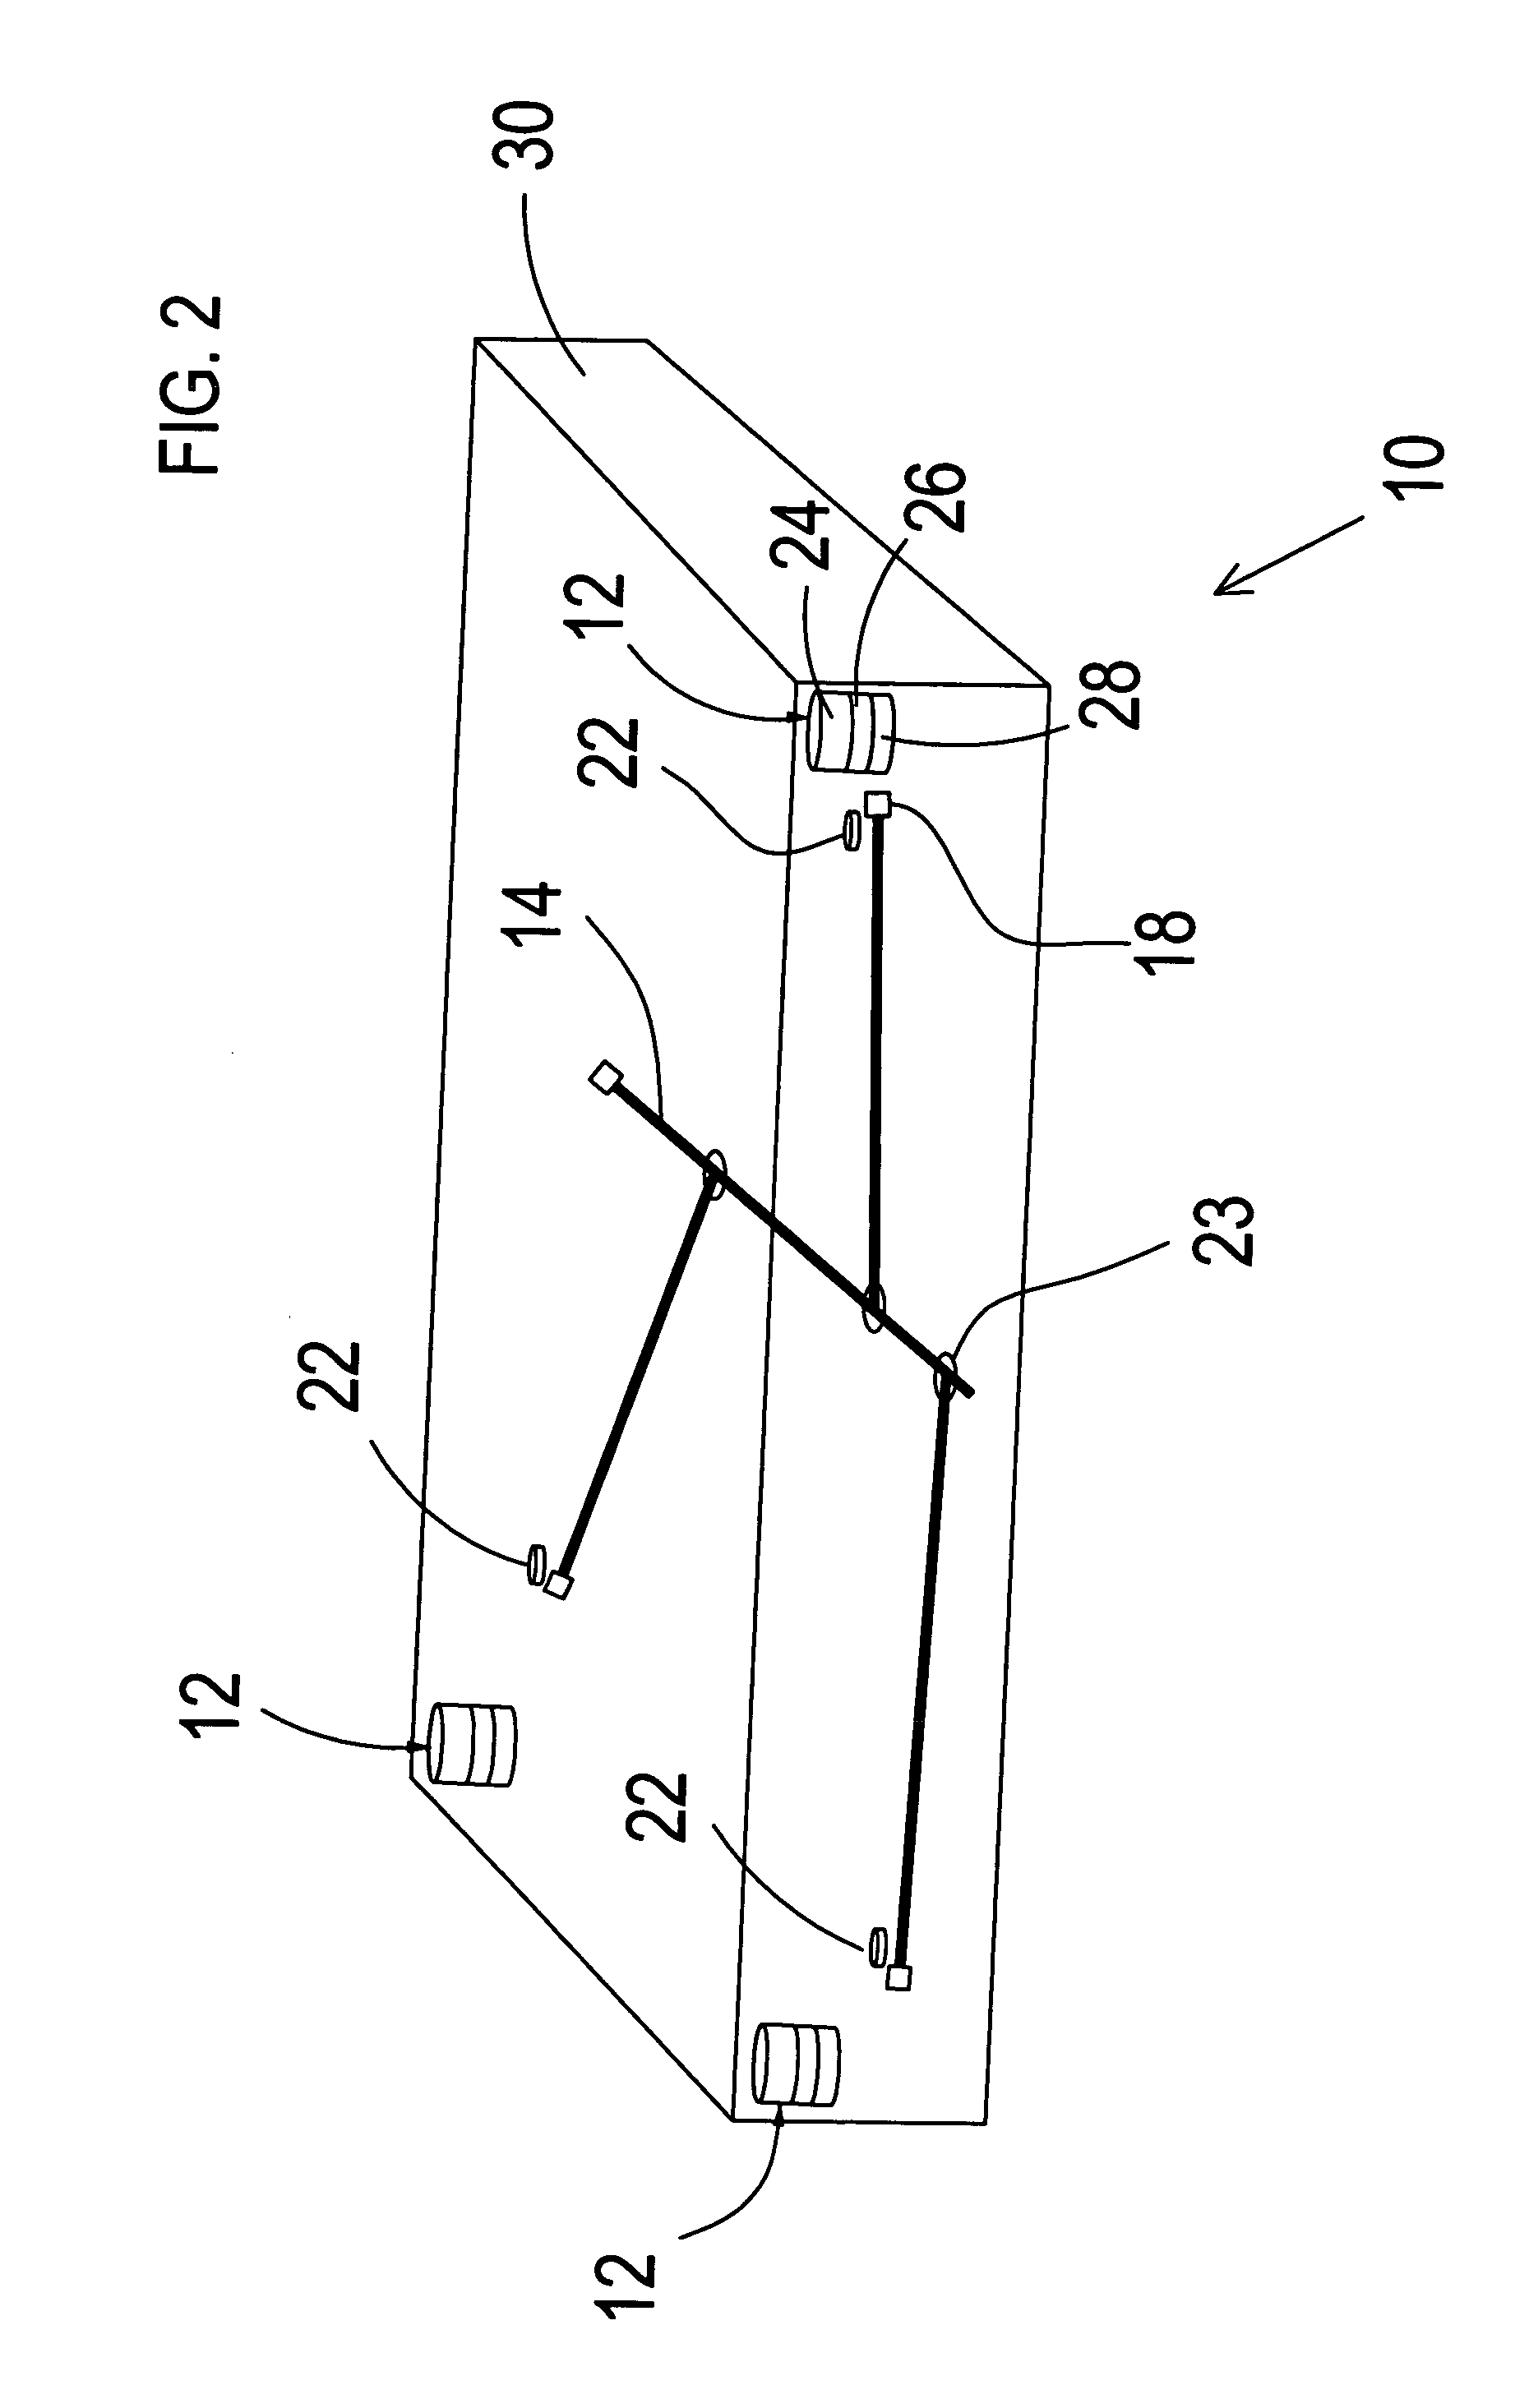 System and method for connecting with a network of sensors